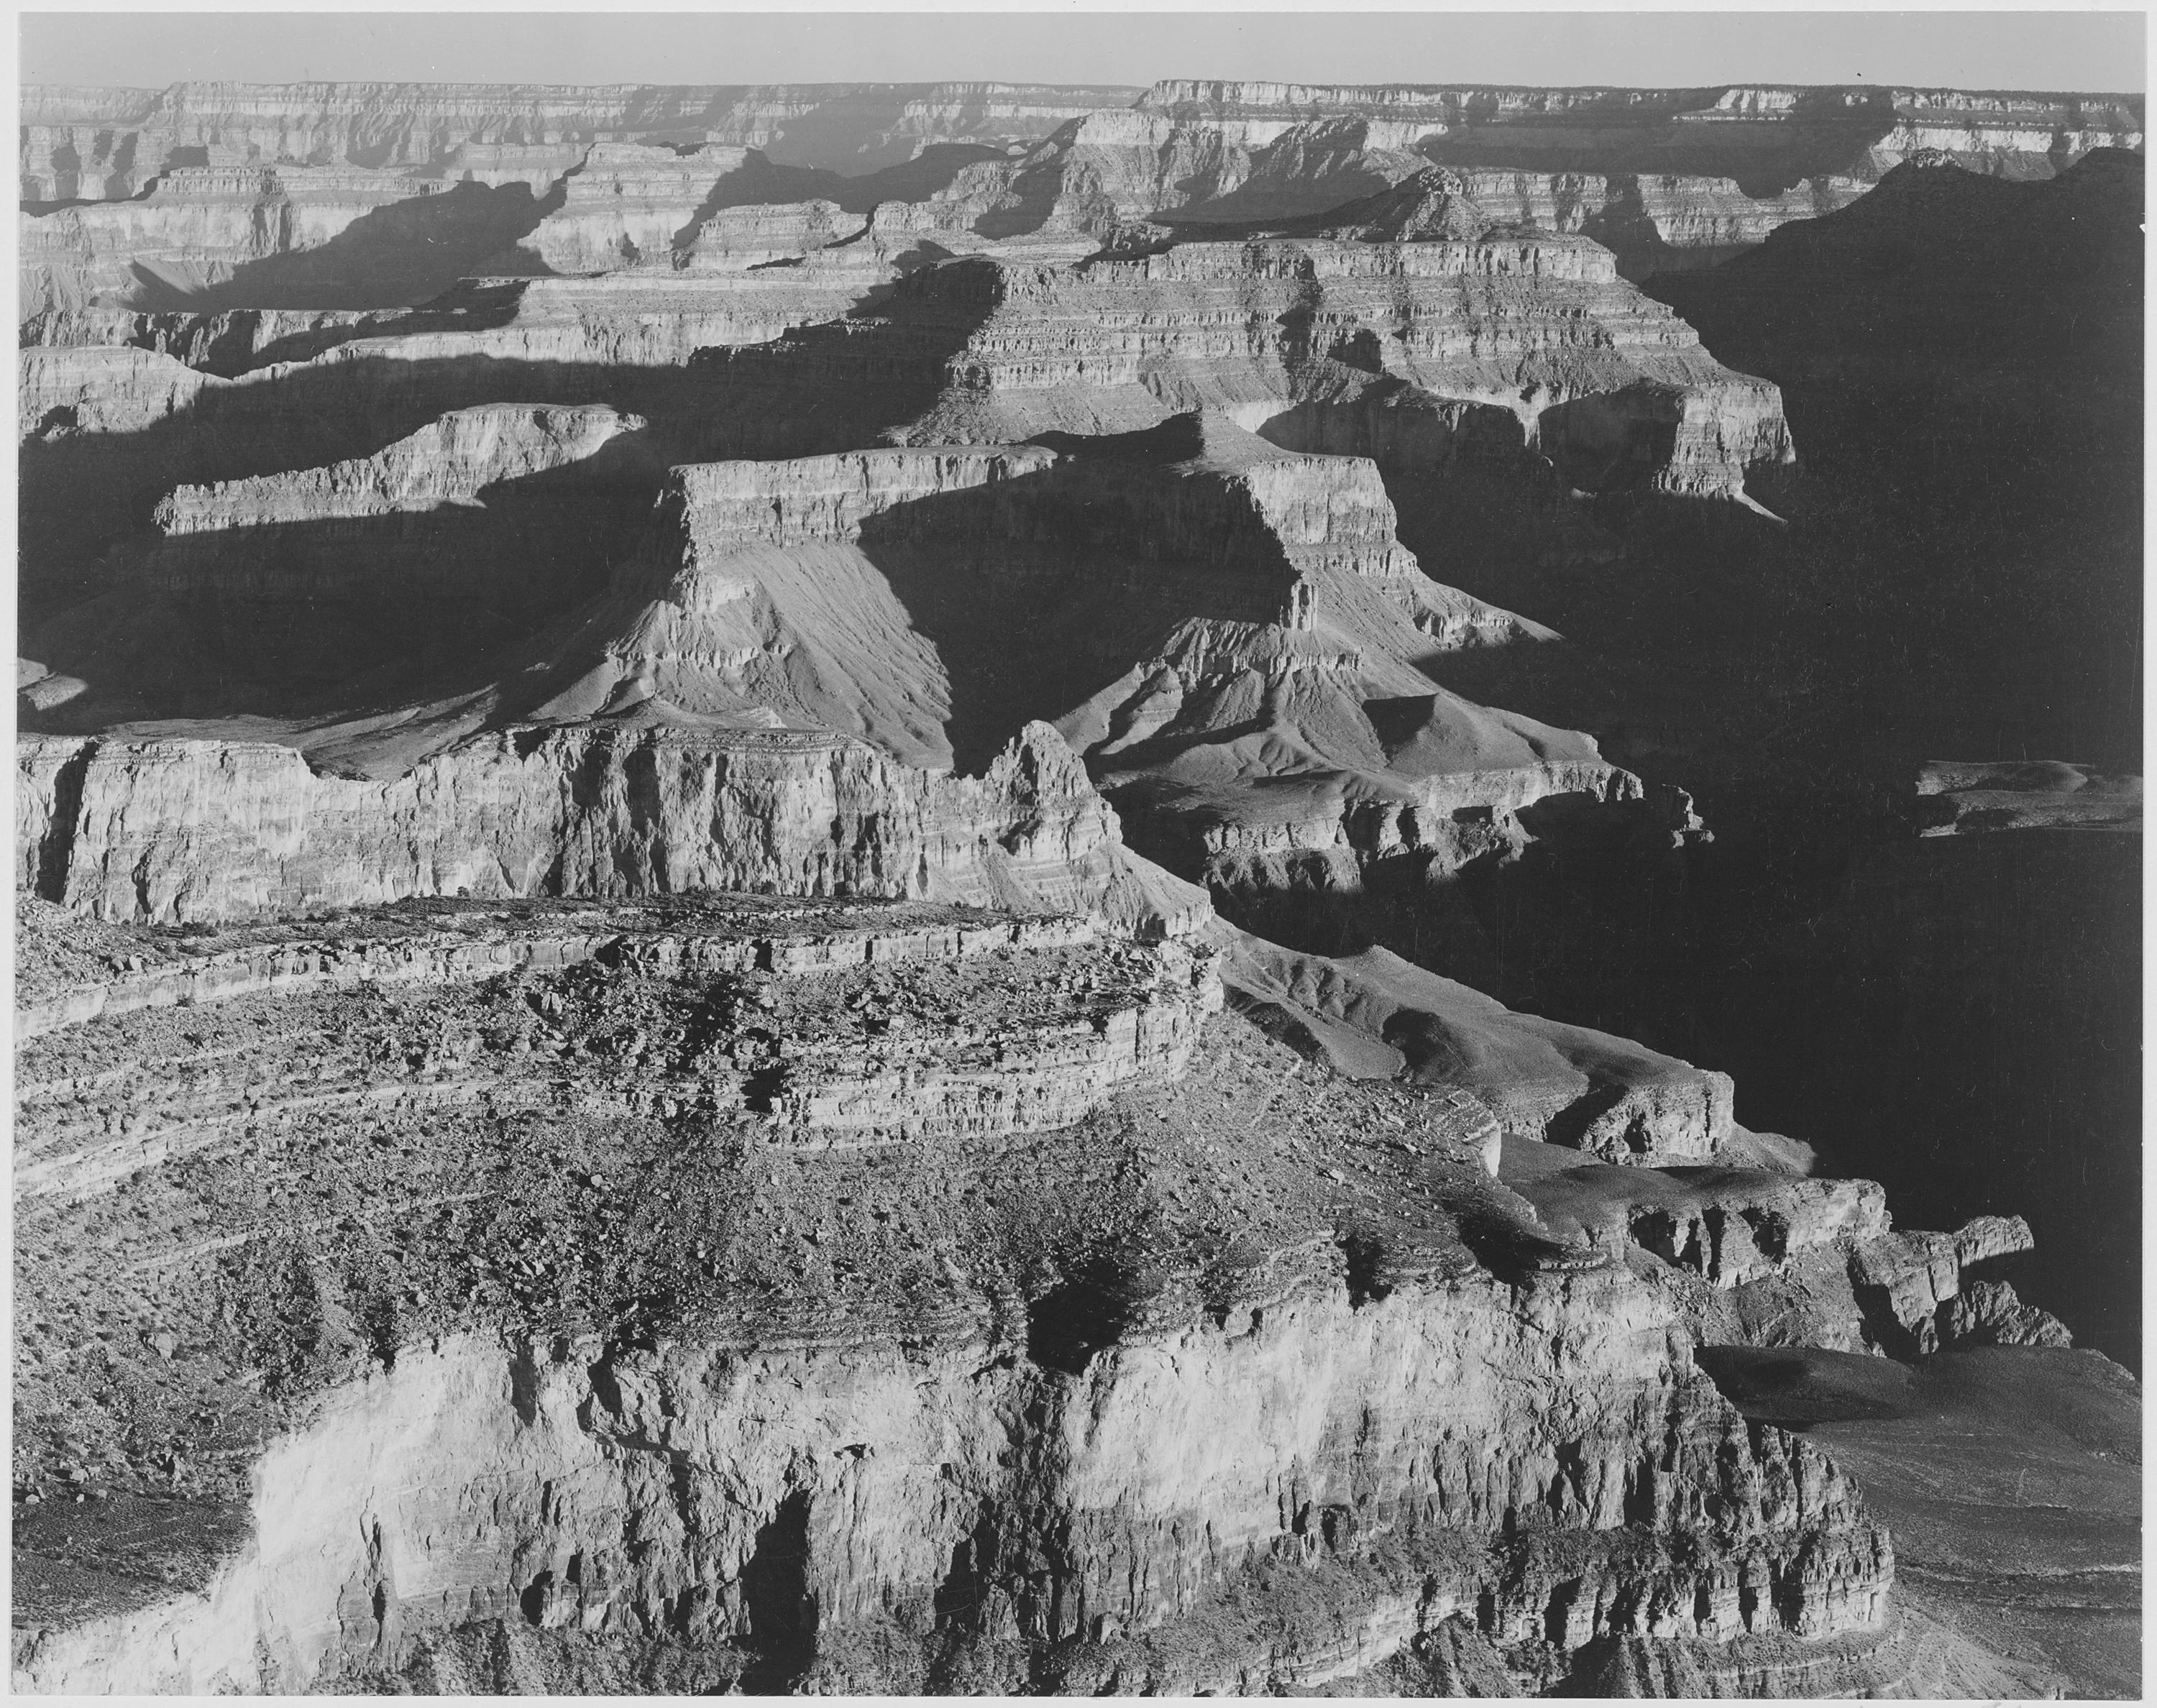 Ansel Adams - National Archives 79-AA-F20